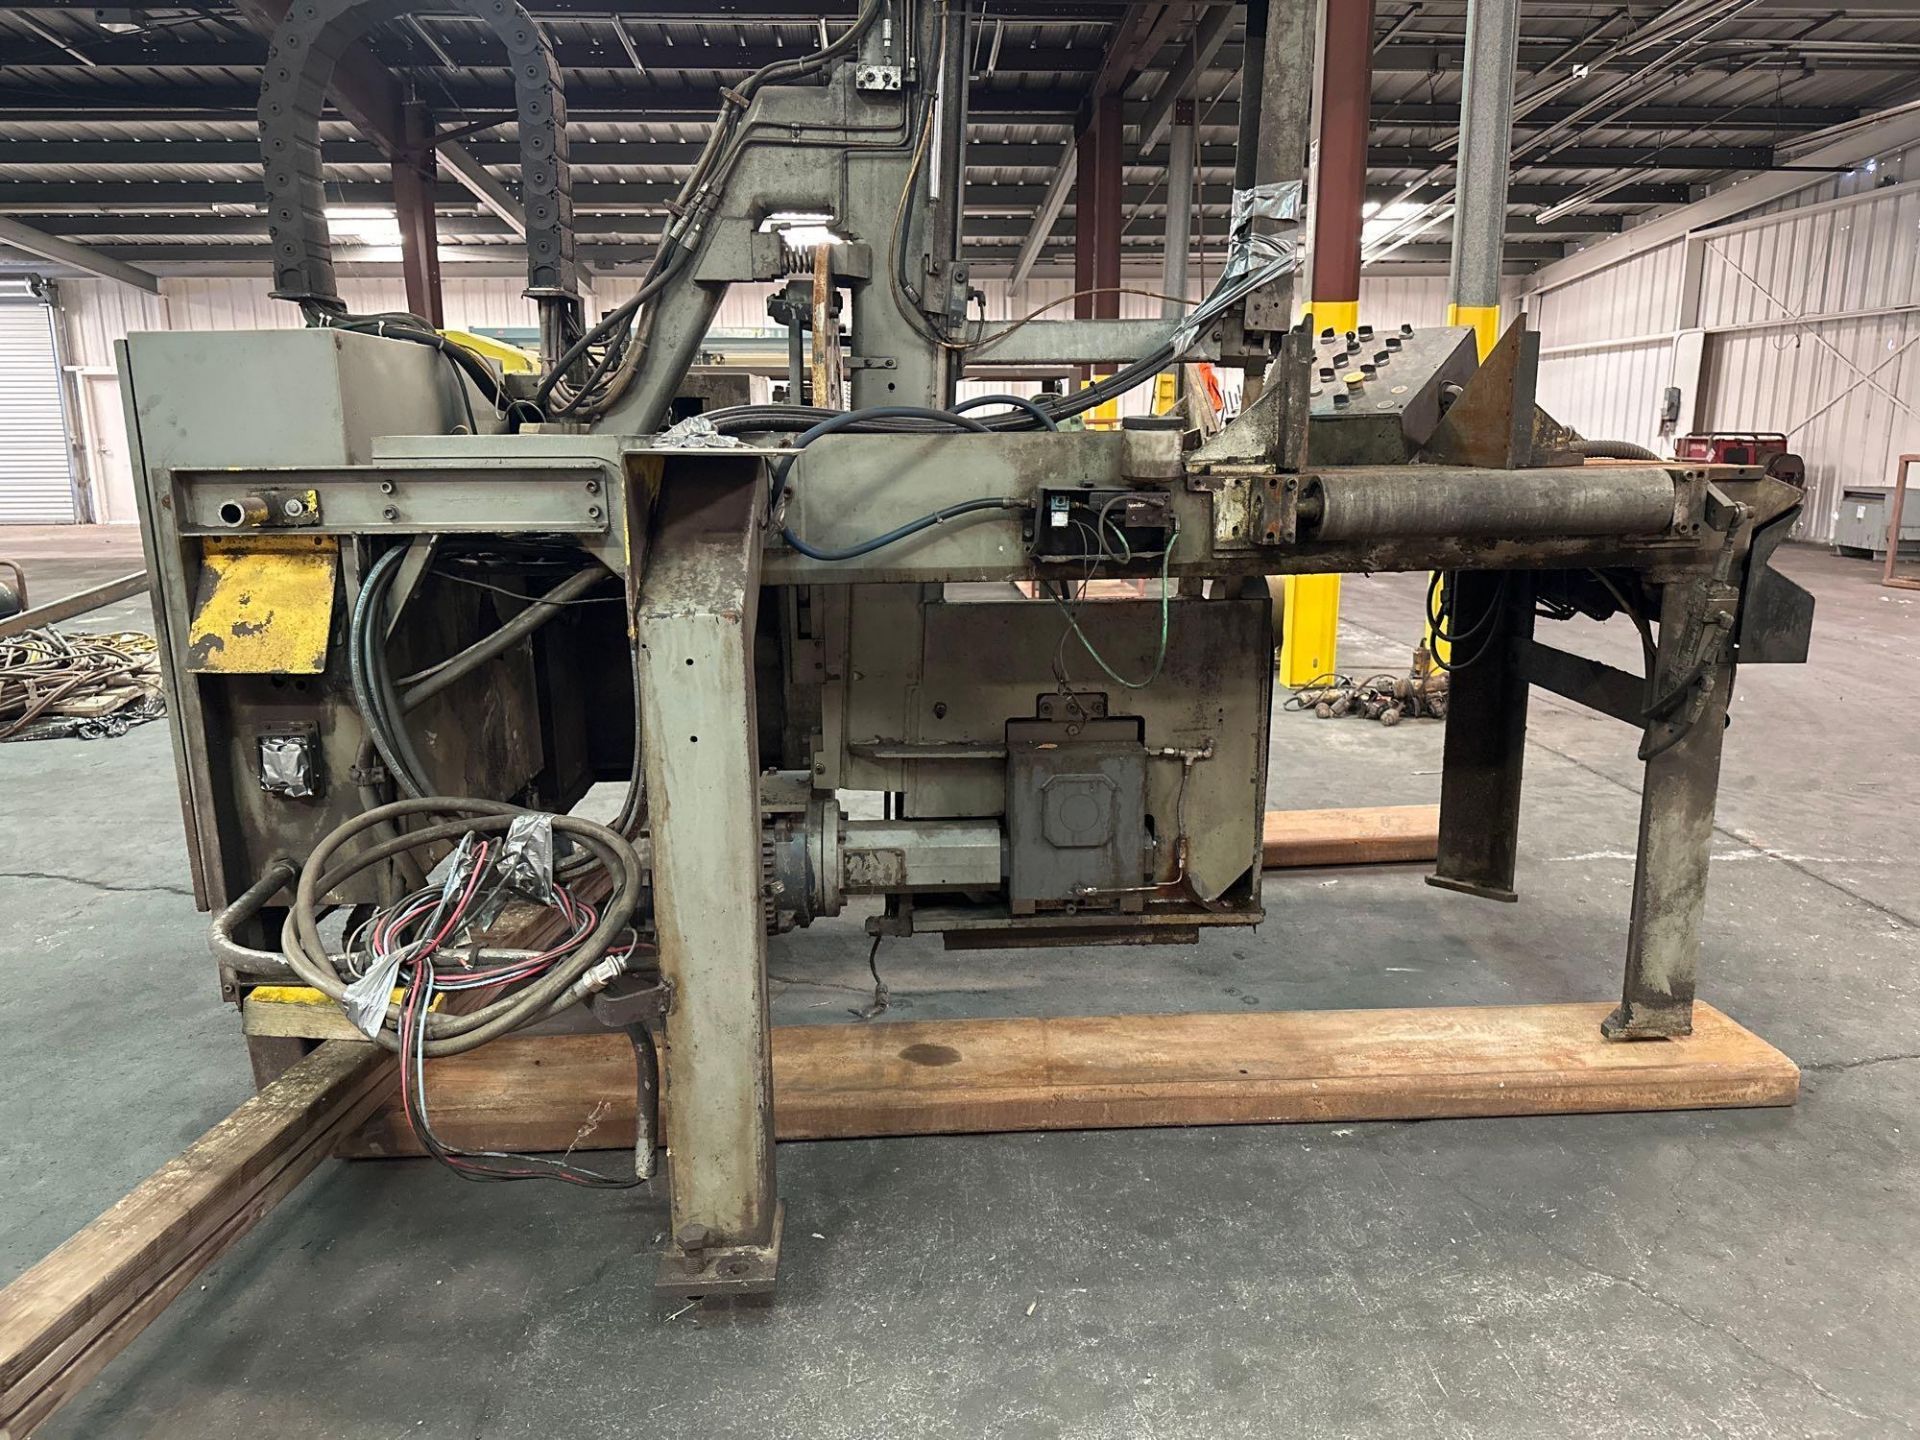 Marvel Series 2150A-PC60 Tilt Frame Vertical Band Saw, 2’ x 7’ Conveyor *Located in Redlands, CA* - Image 6 of 25